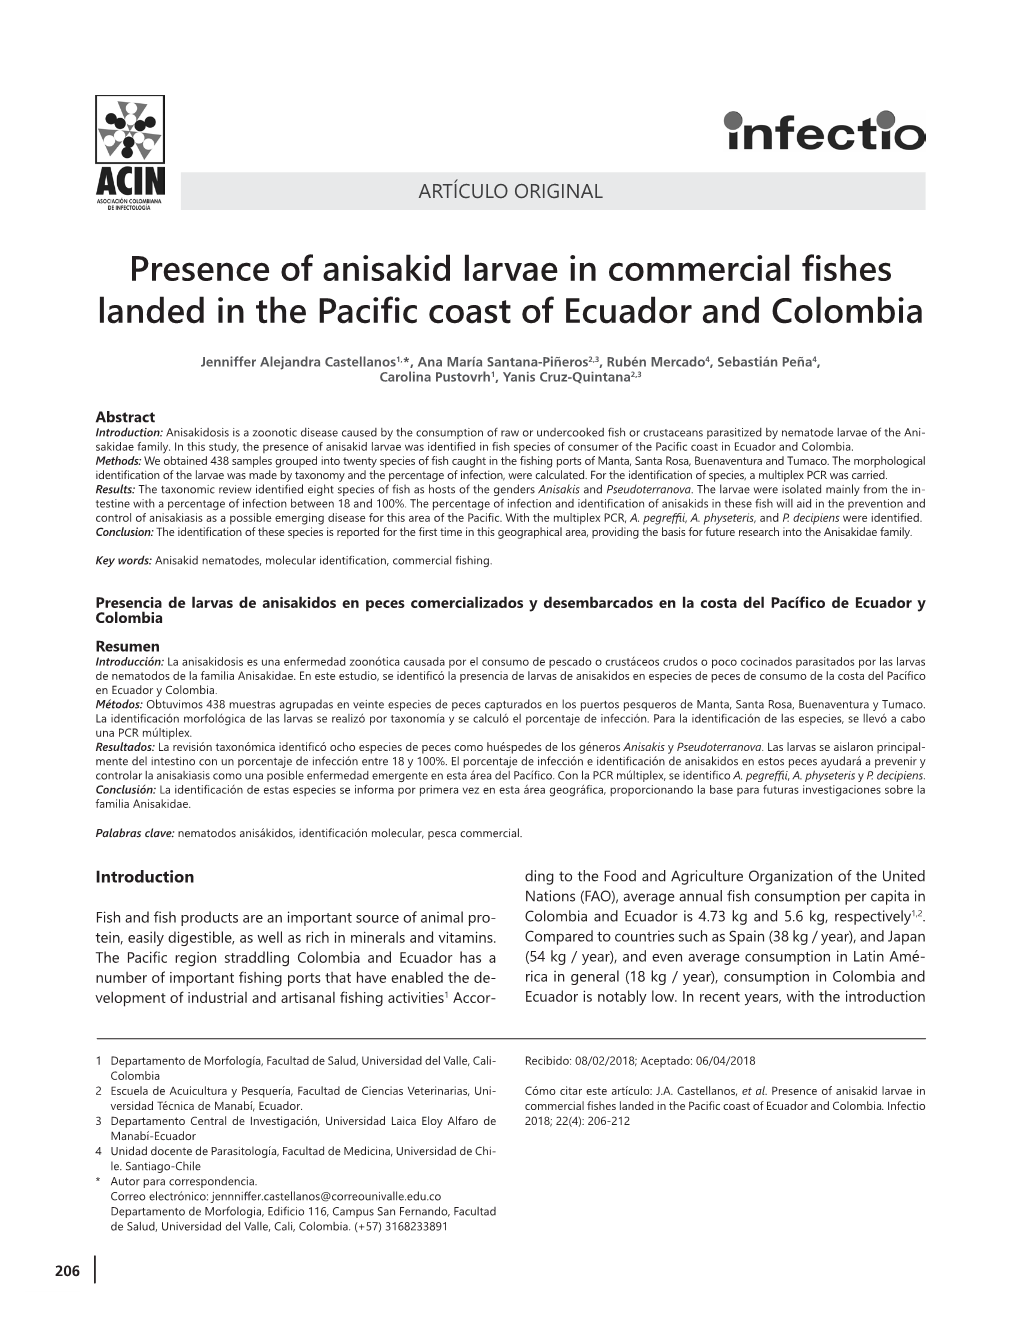 Presence of Anisakid Larvae in Commercial Fishes Landed in the Pacific Coast of Ecuador and Colombia